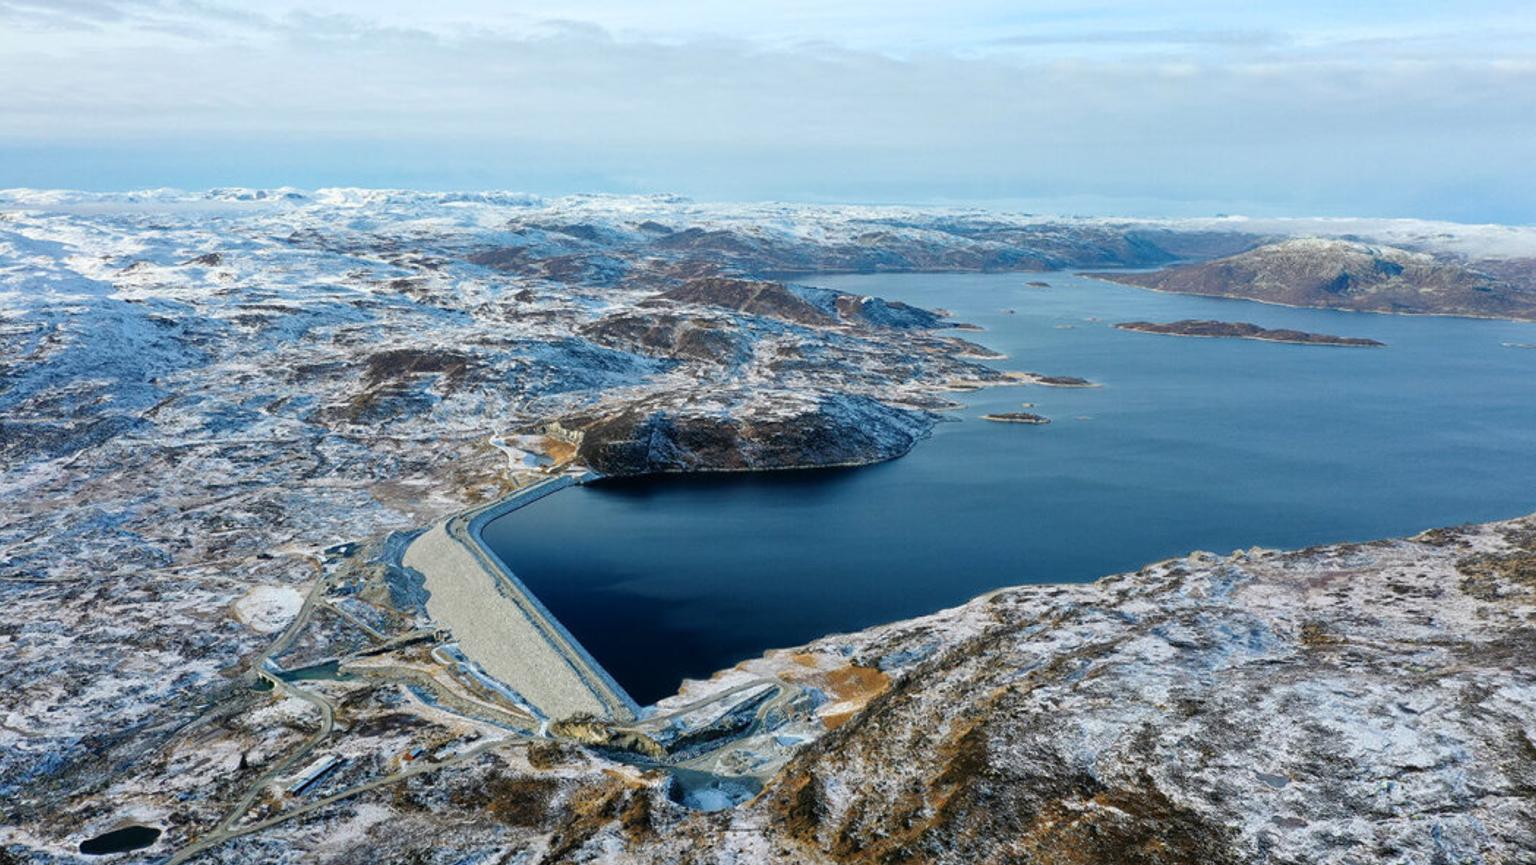 Norway’s unique selling point remains its surplus of renewable electricity generated by clean hydropower.